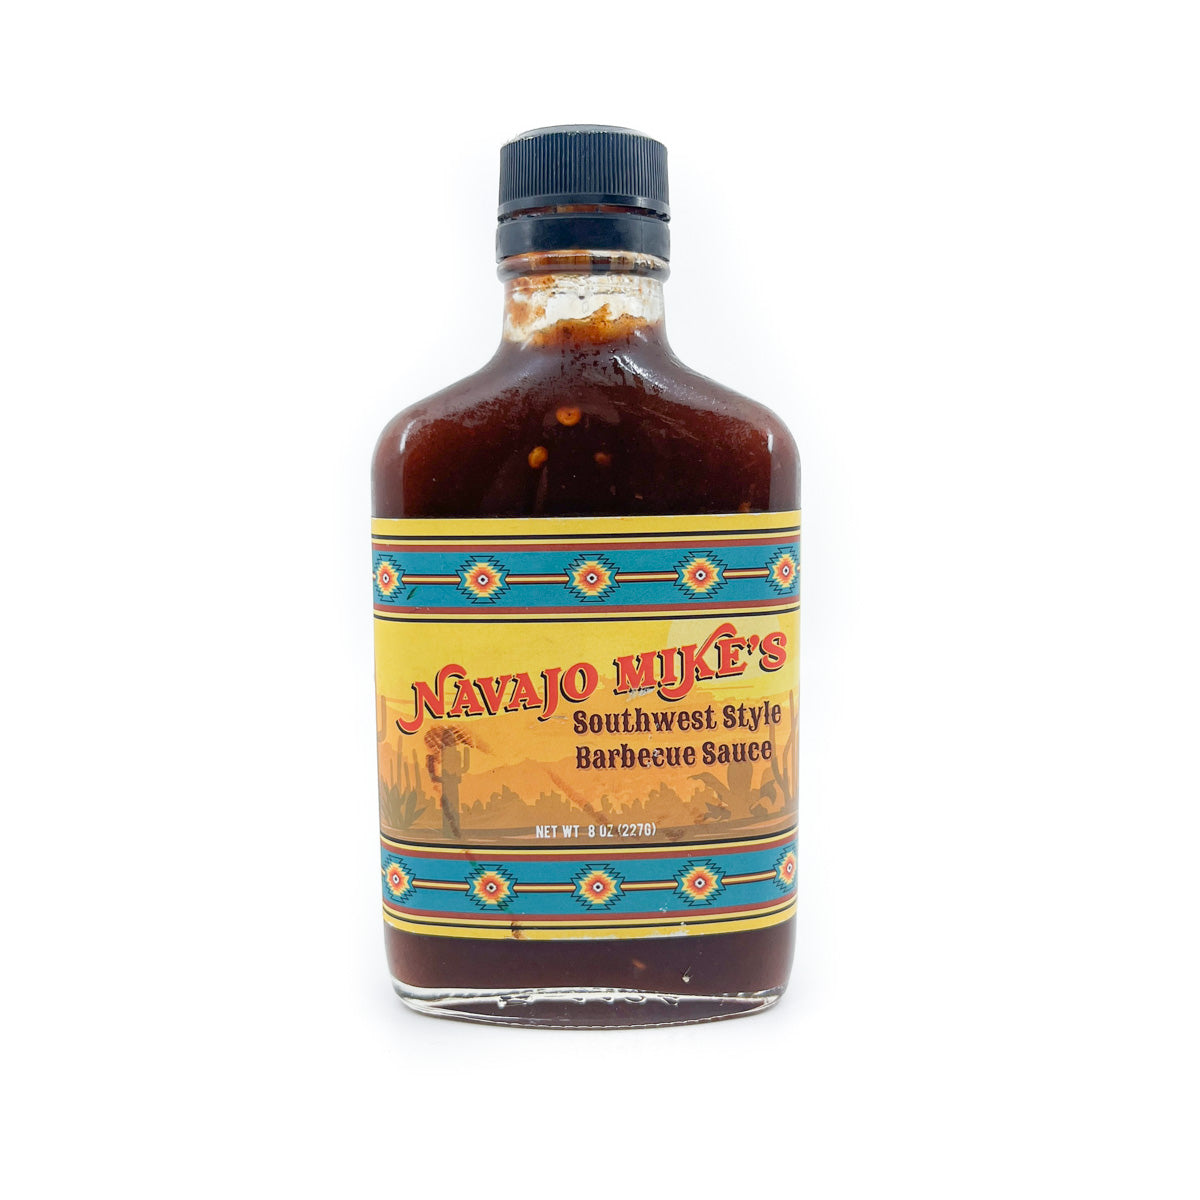 NEW! Southwest Style Barbeque Sauce